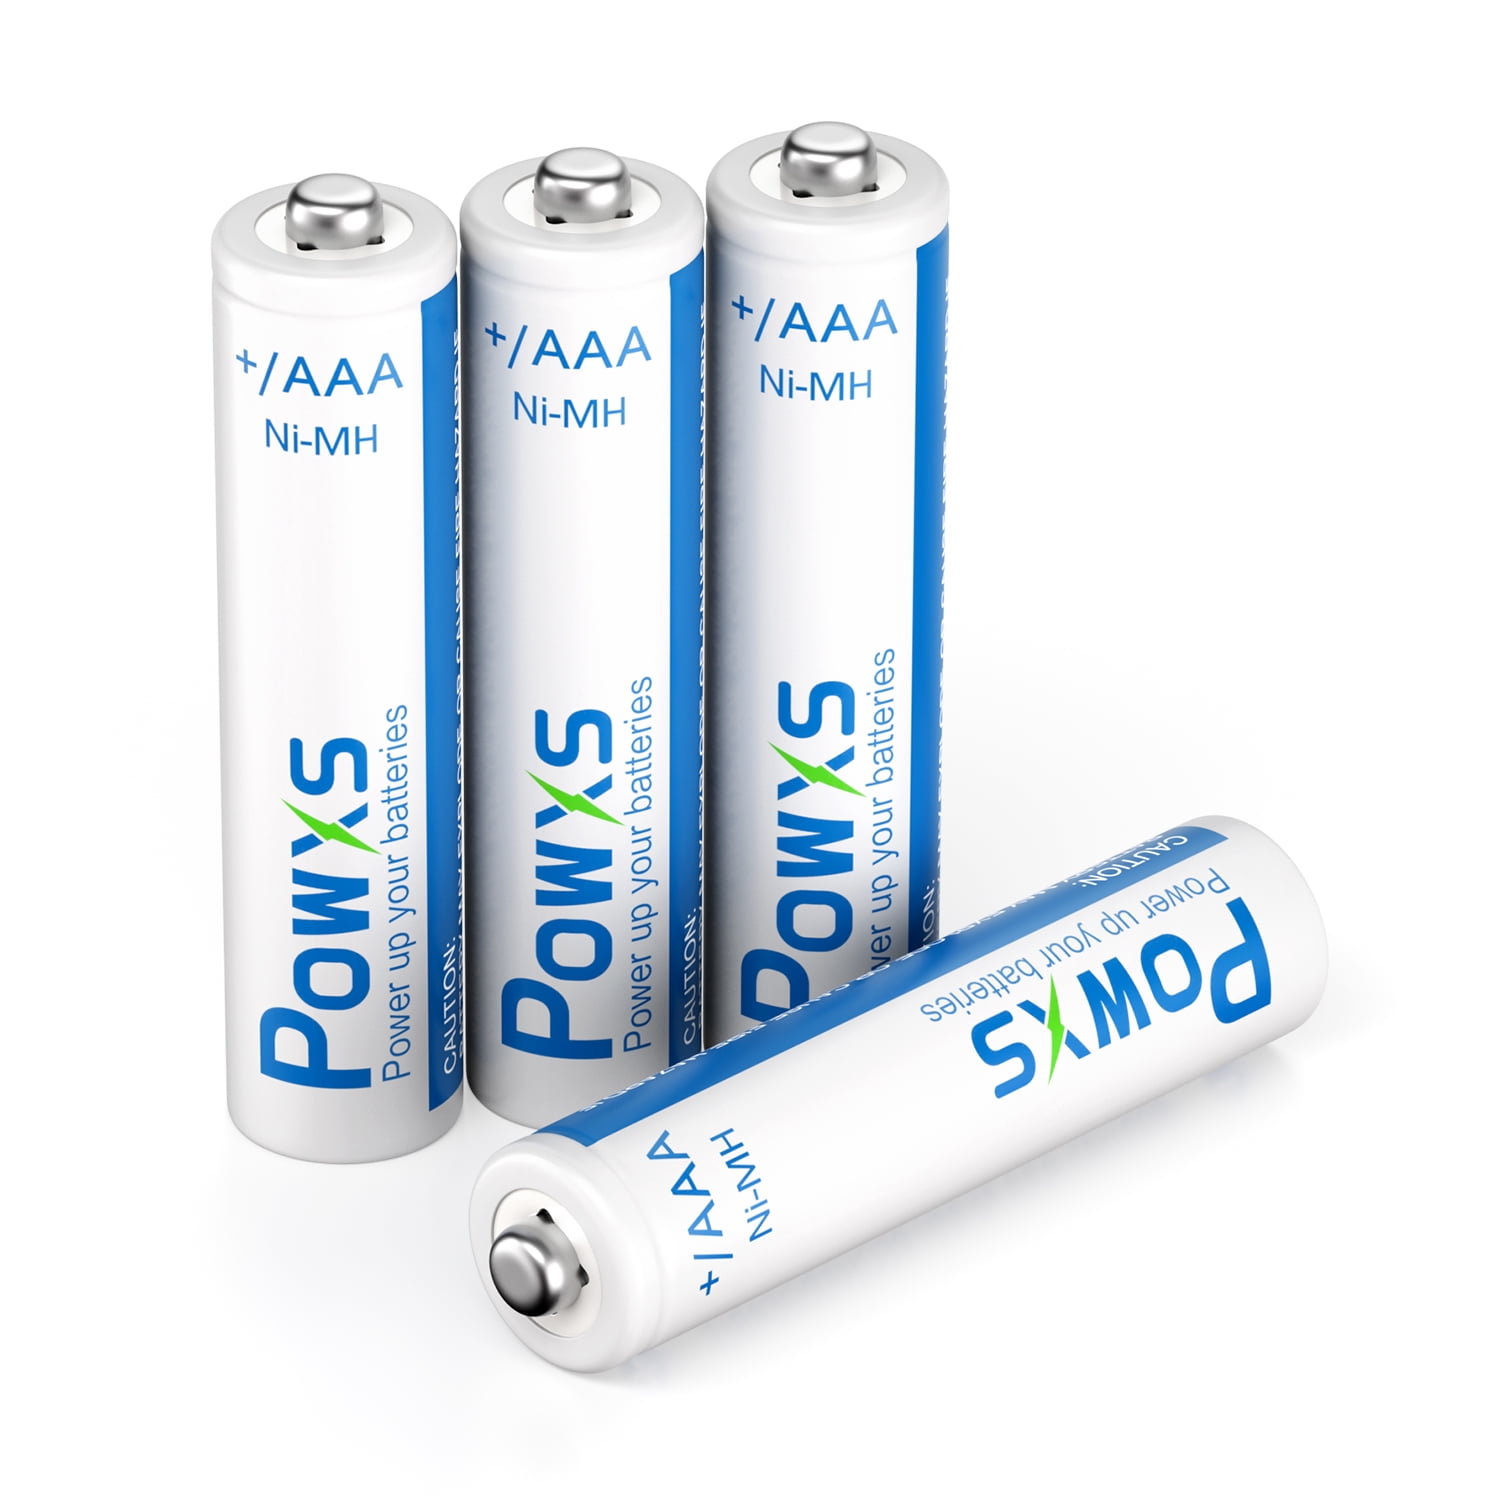 POWXS AA Rechargeable Batteries 2000mAh Pre-Charged 1.2 Volt Ni-MH Low Self-Discharge AA Batteries 8 Pack